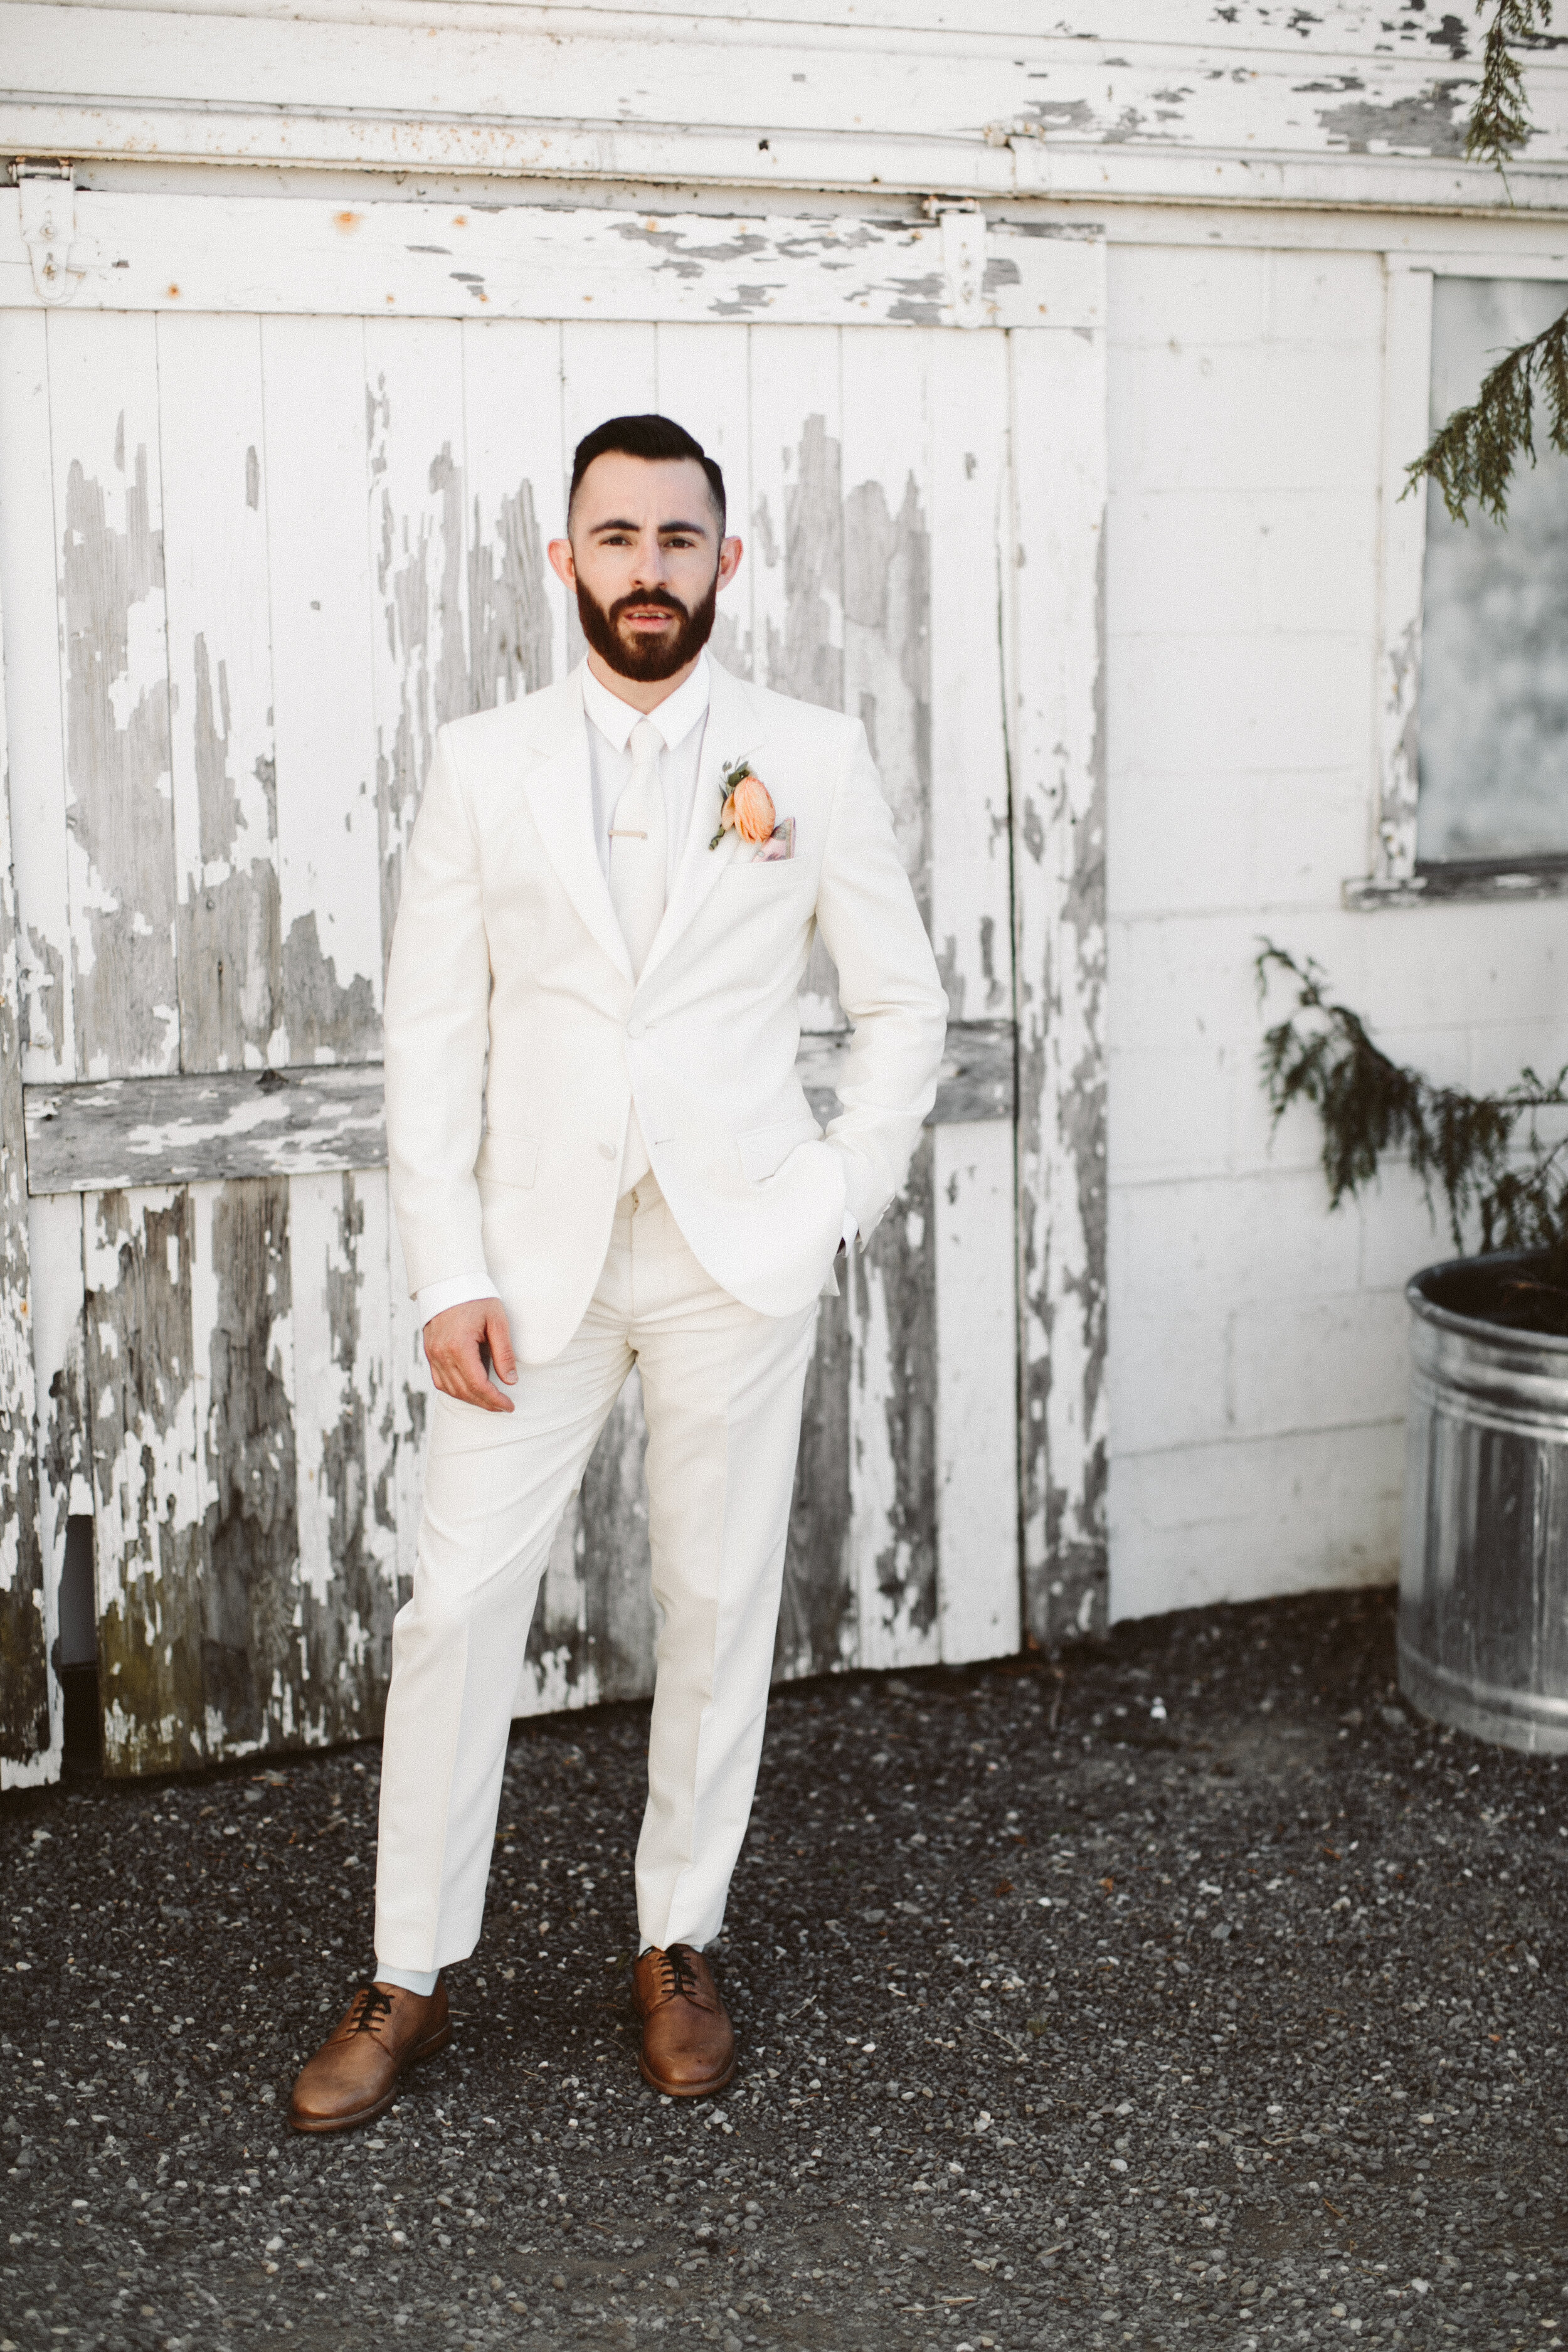 dairyland-wedding-suit-for-groom-white-wedding-dairyland-seattle-pacific-engagements